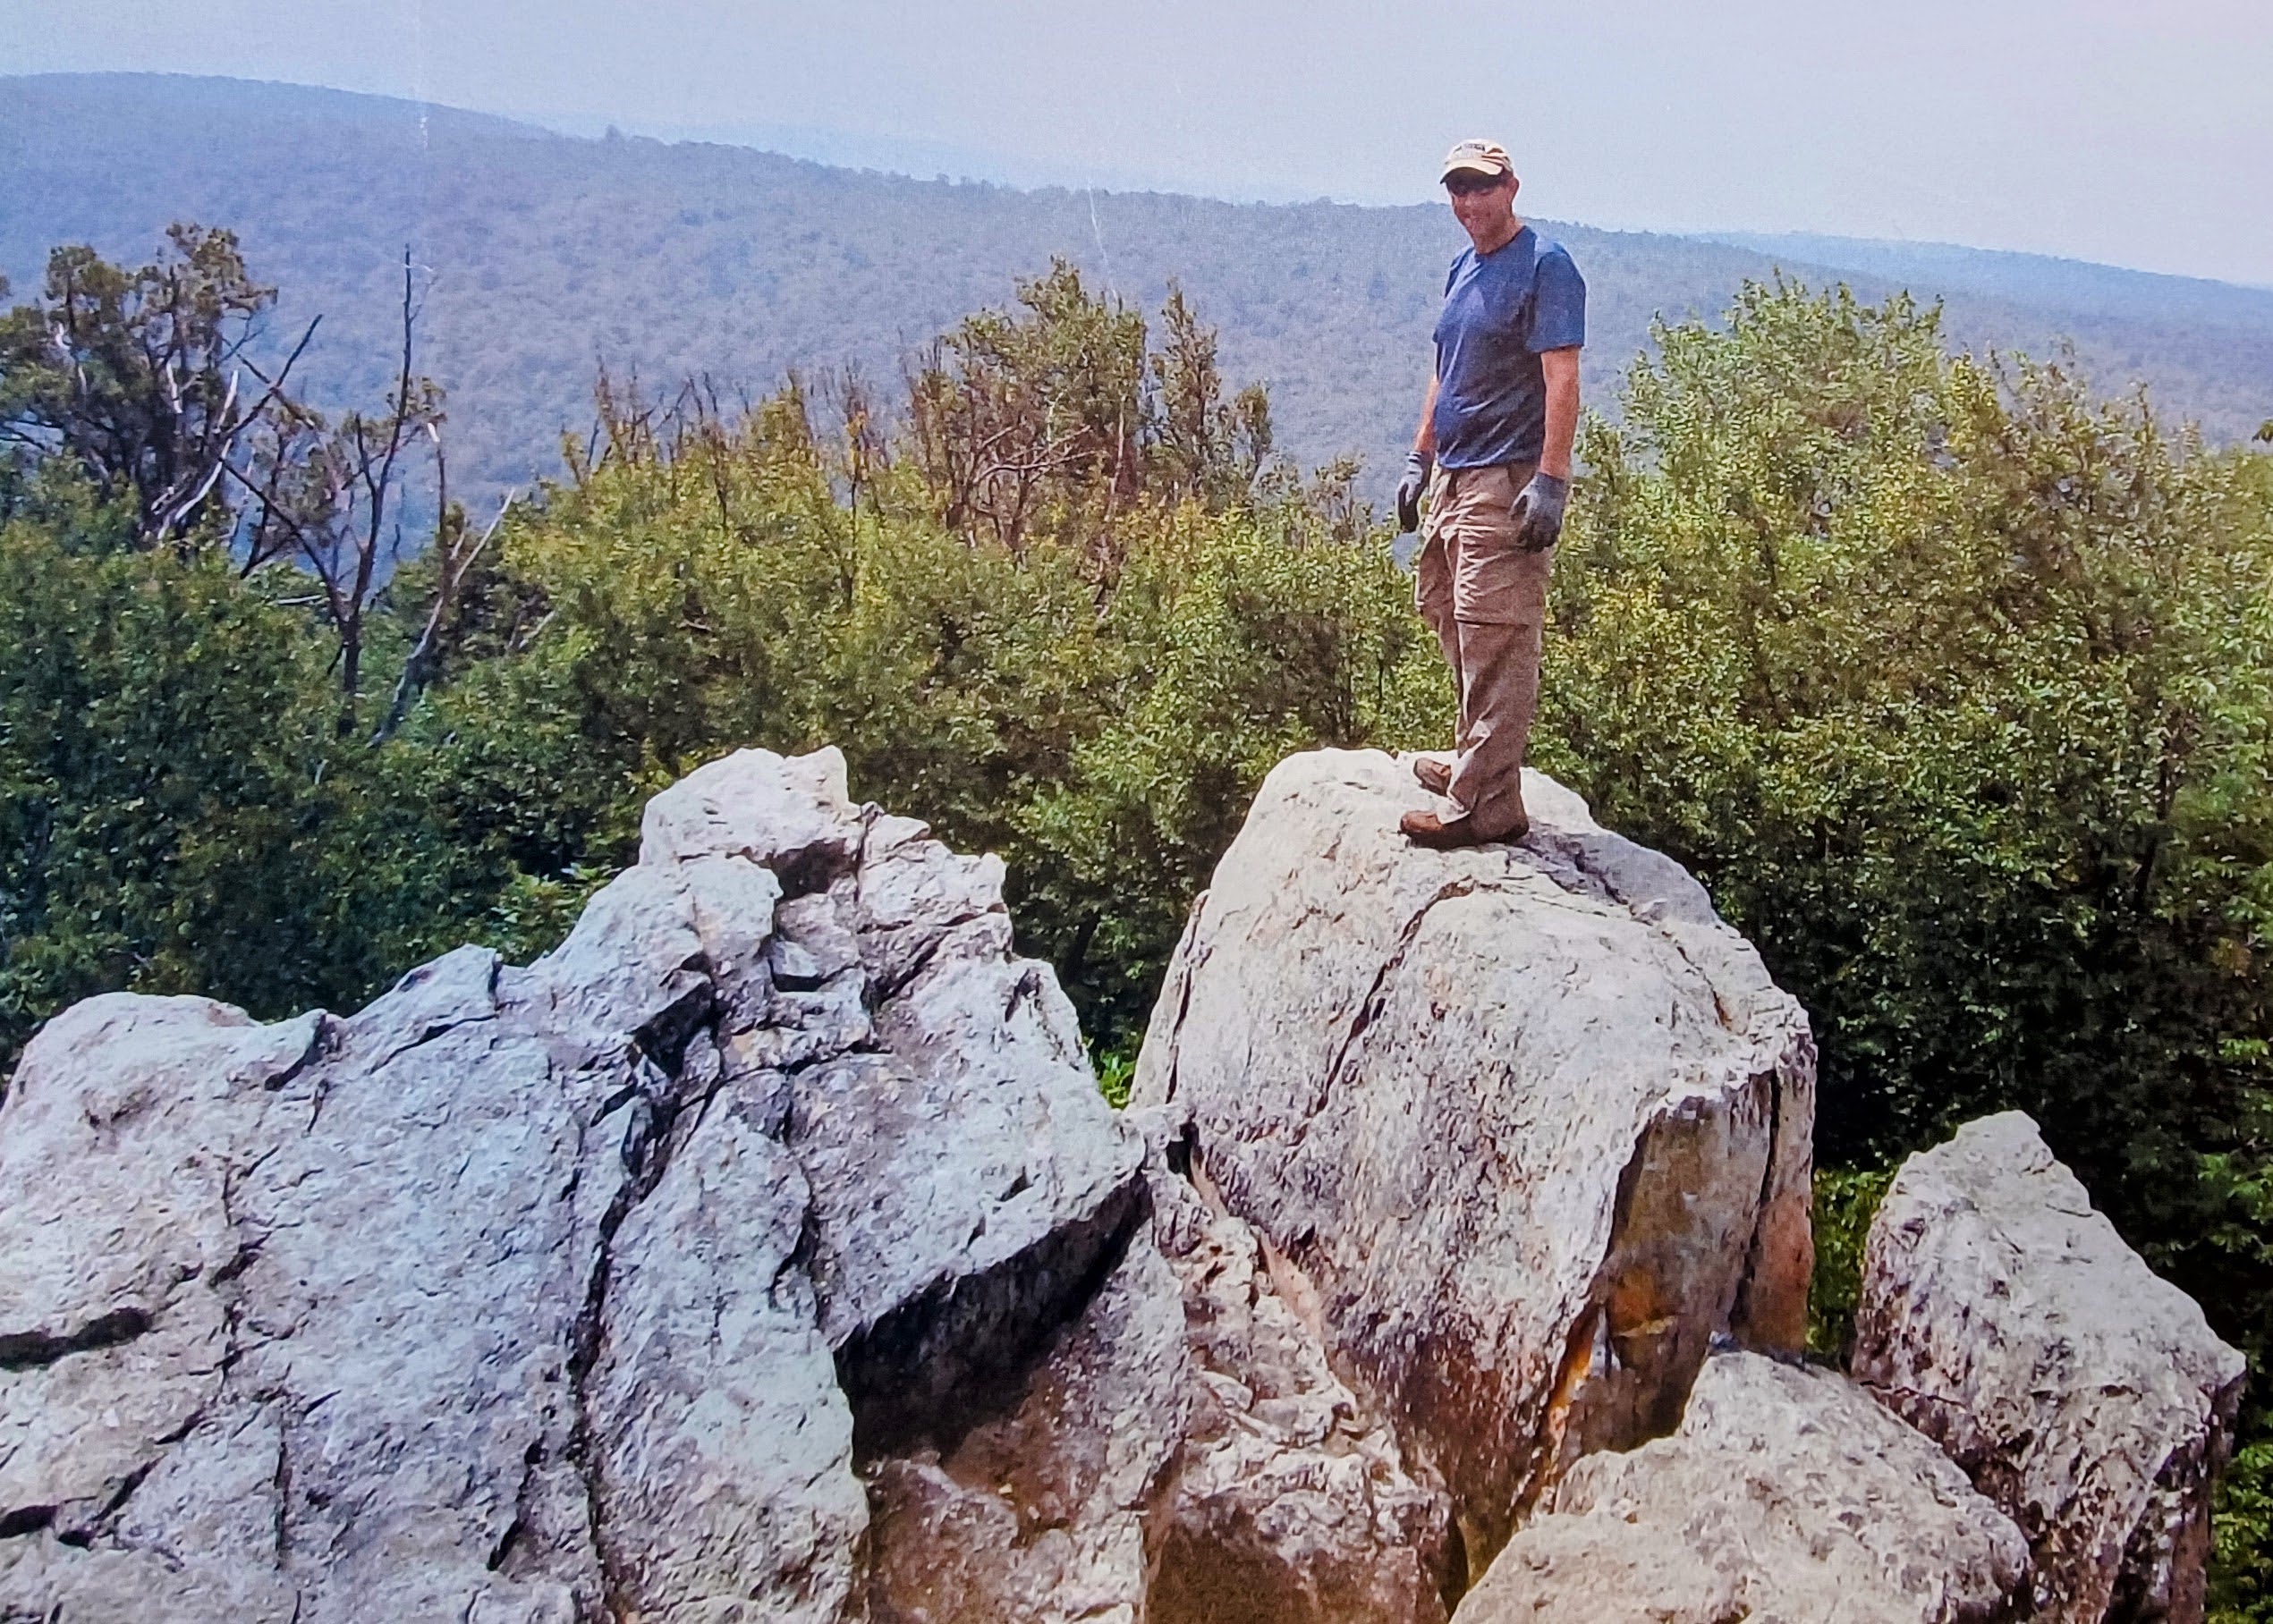 Steve Krasnow shares his experience of finding renewal in solo experiences outdoors.